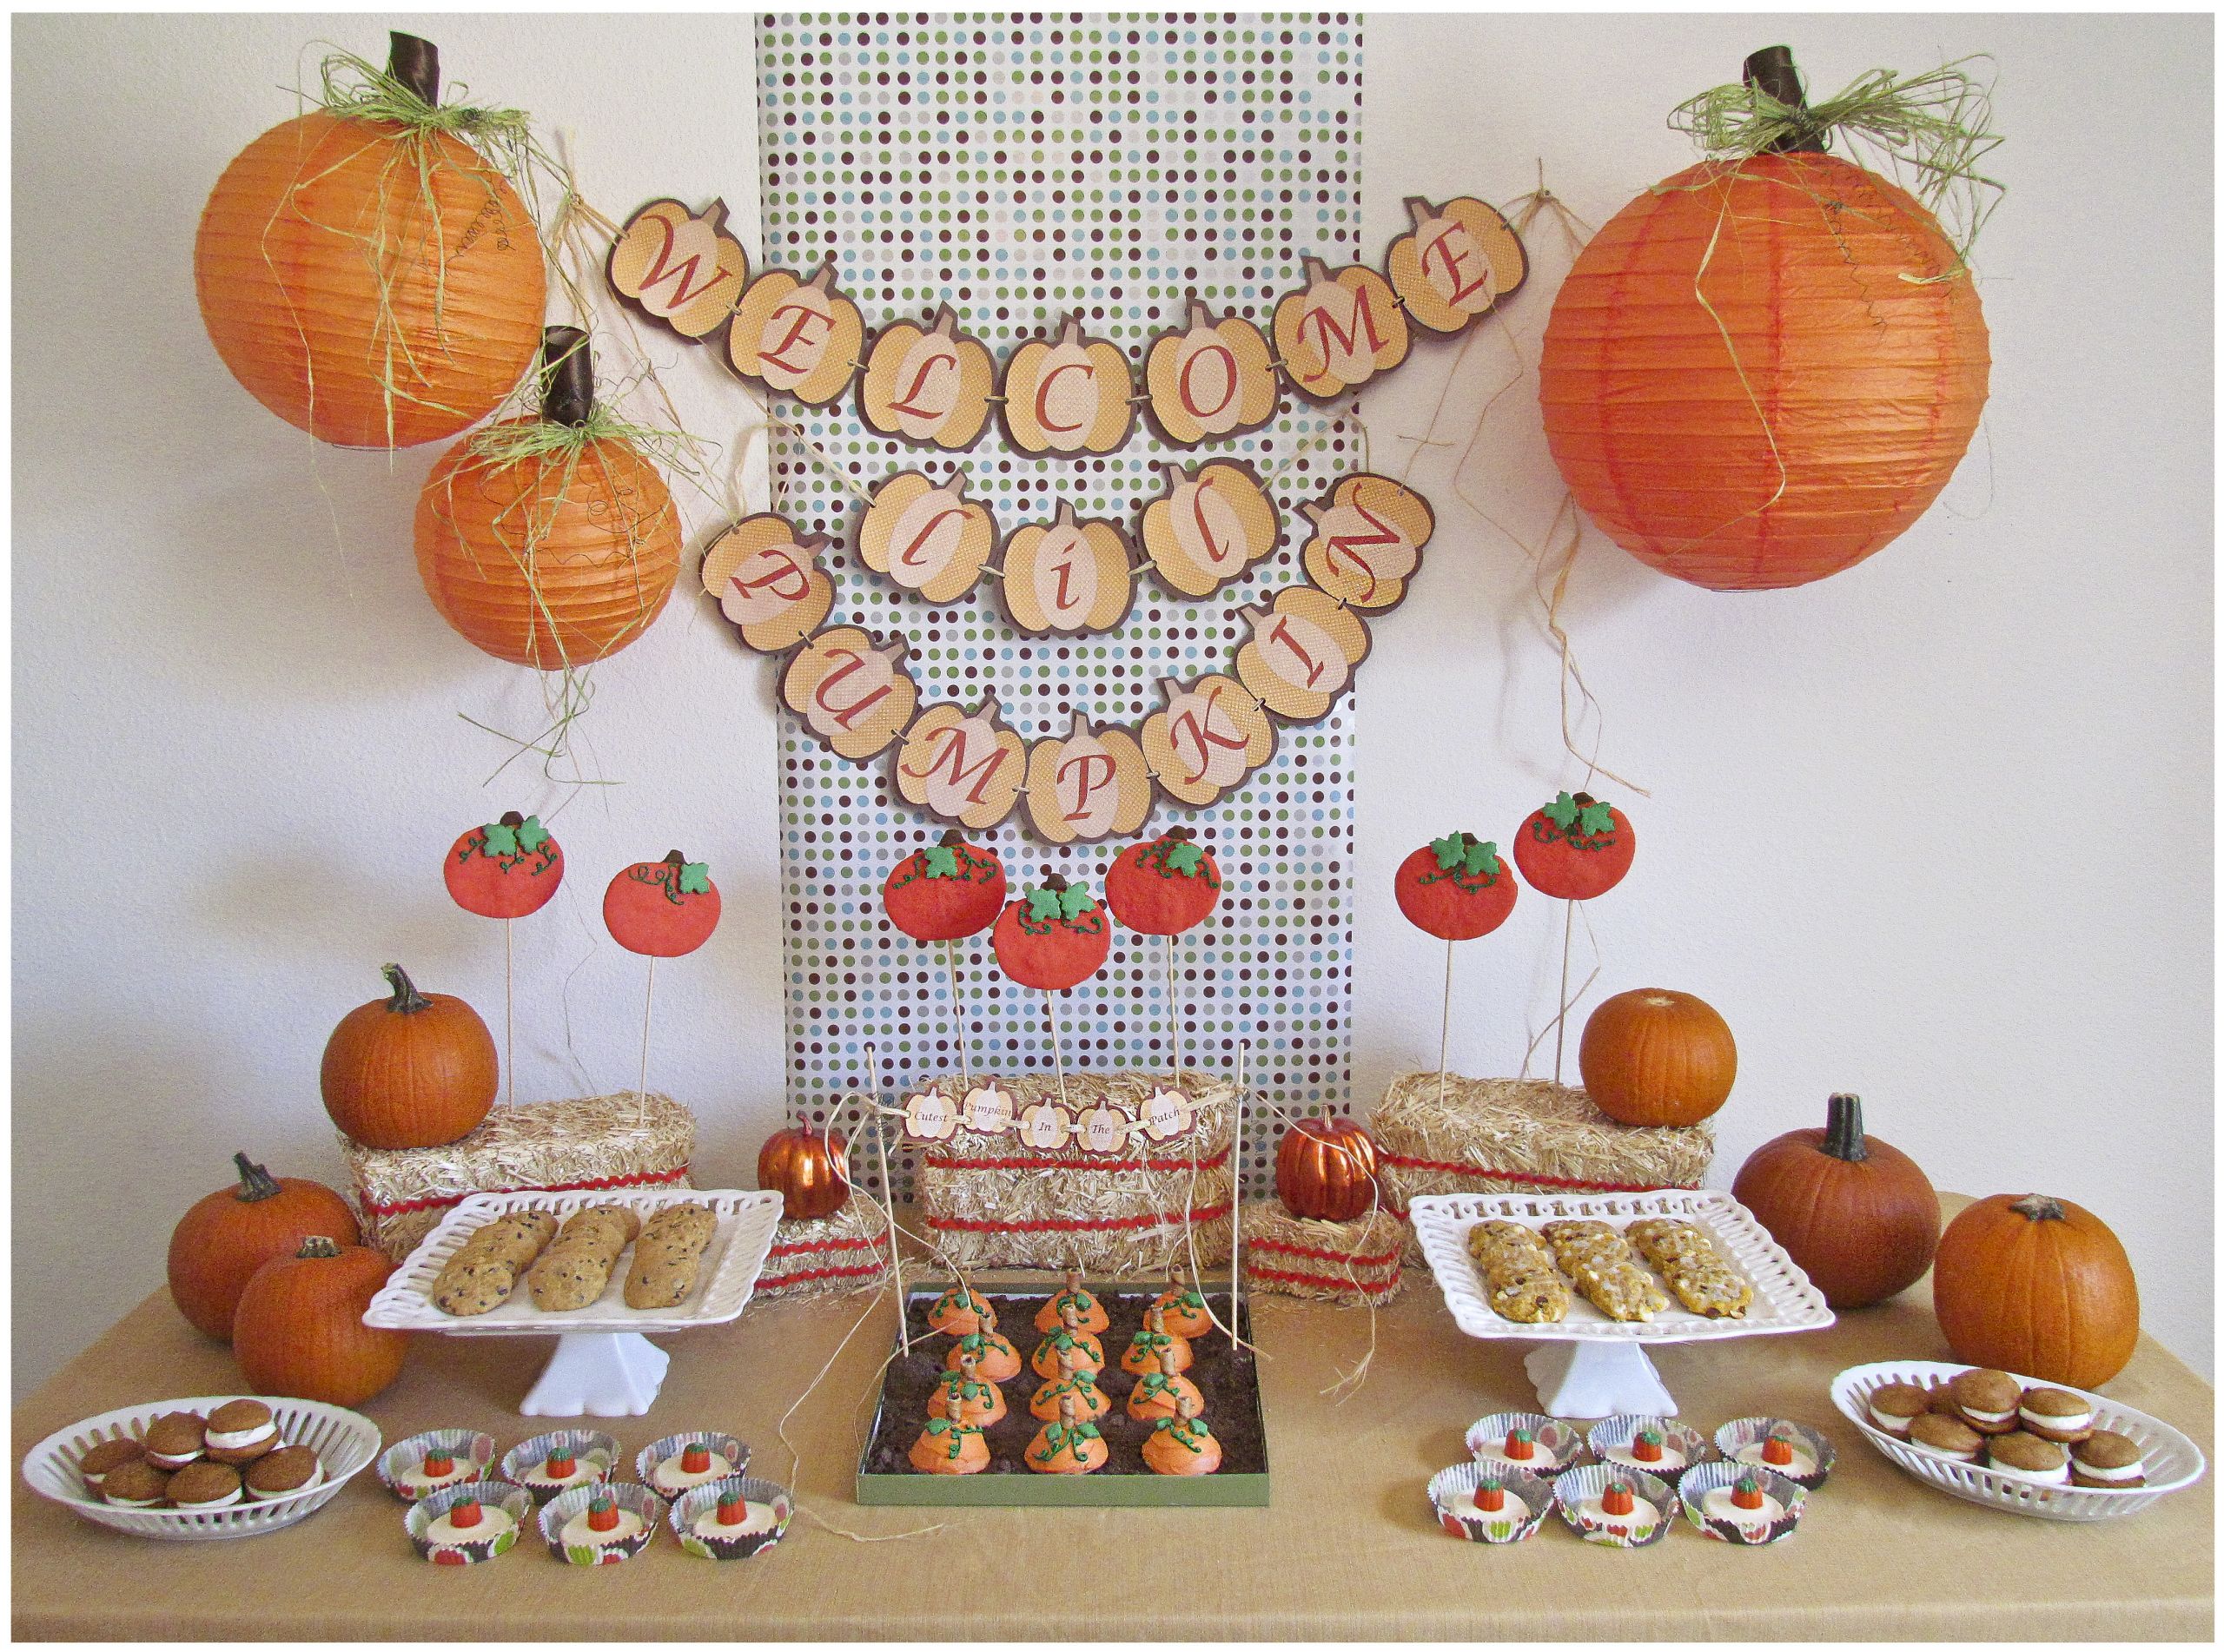 Fall Baby Shower Decorating Ideas
 Decorating Ideas For Baby Shower Centerpieces